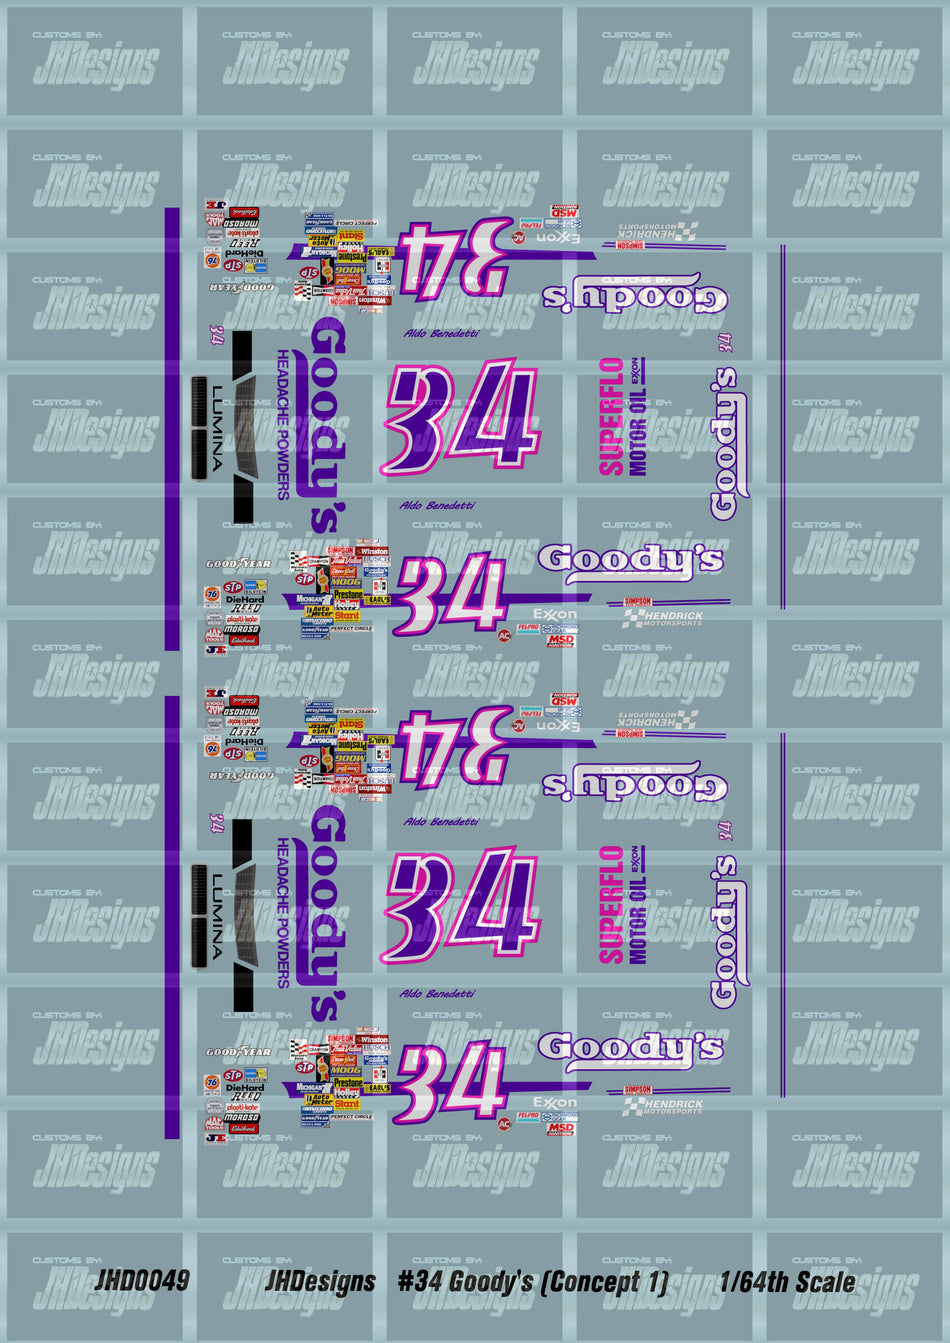 JH Designs Aldo Benedetti 1990 CUP #34 Goody's Headache Powders (Days of Thunder Concept 1) 1:64 Racecar Decal Set